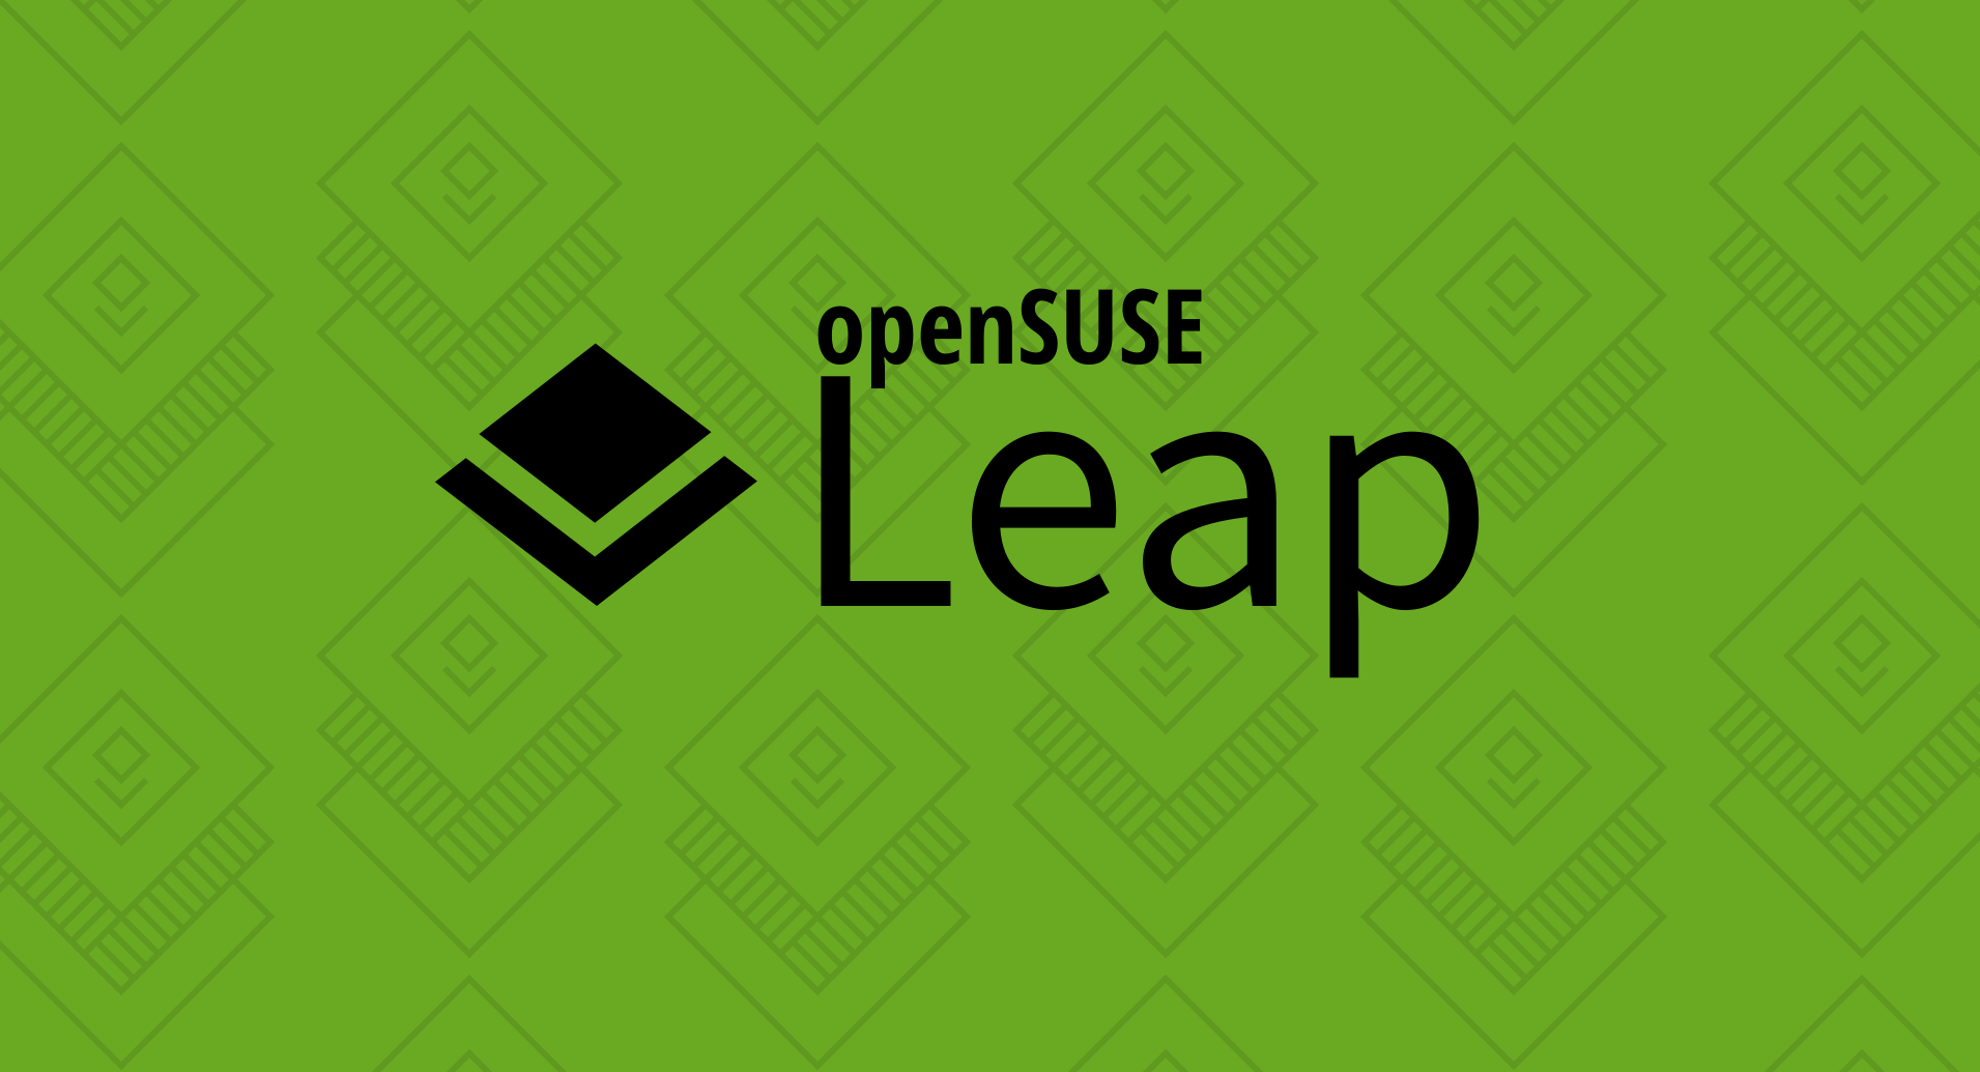 openSUSE Leap offers Predictability